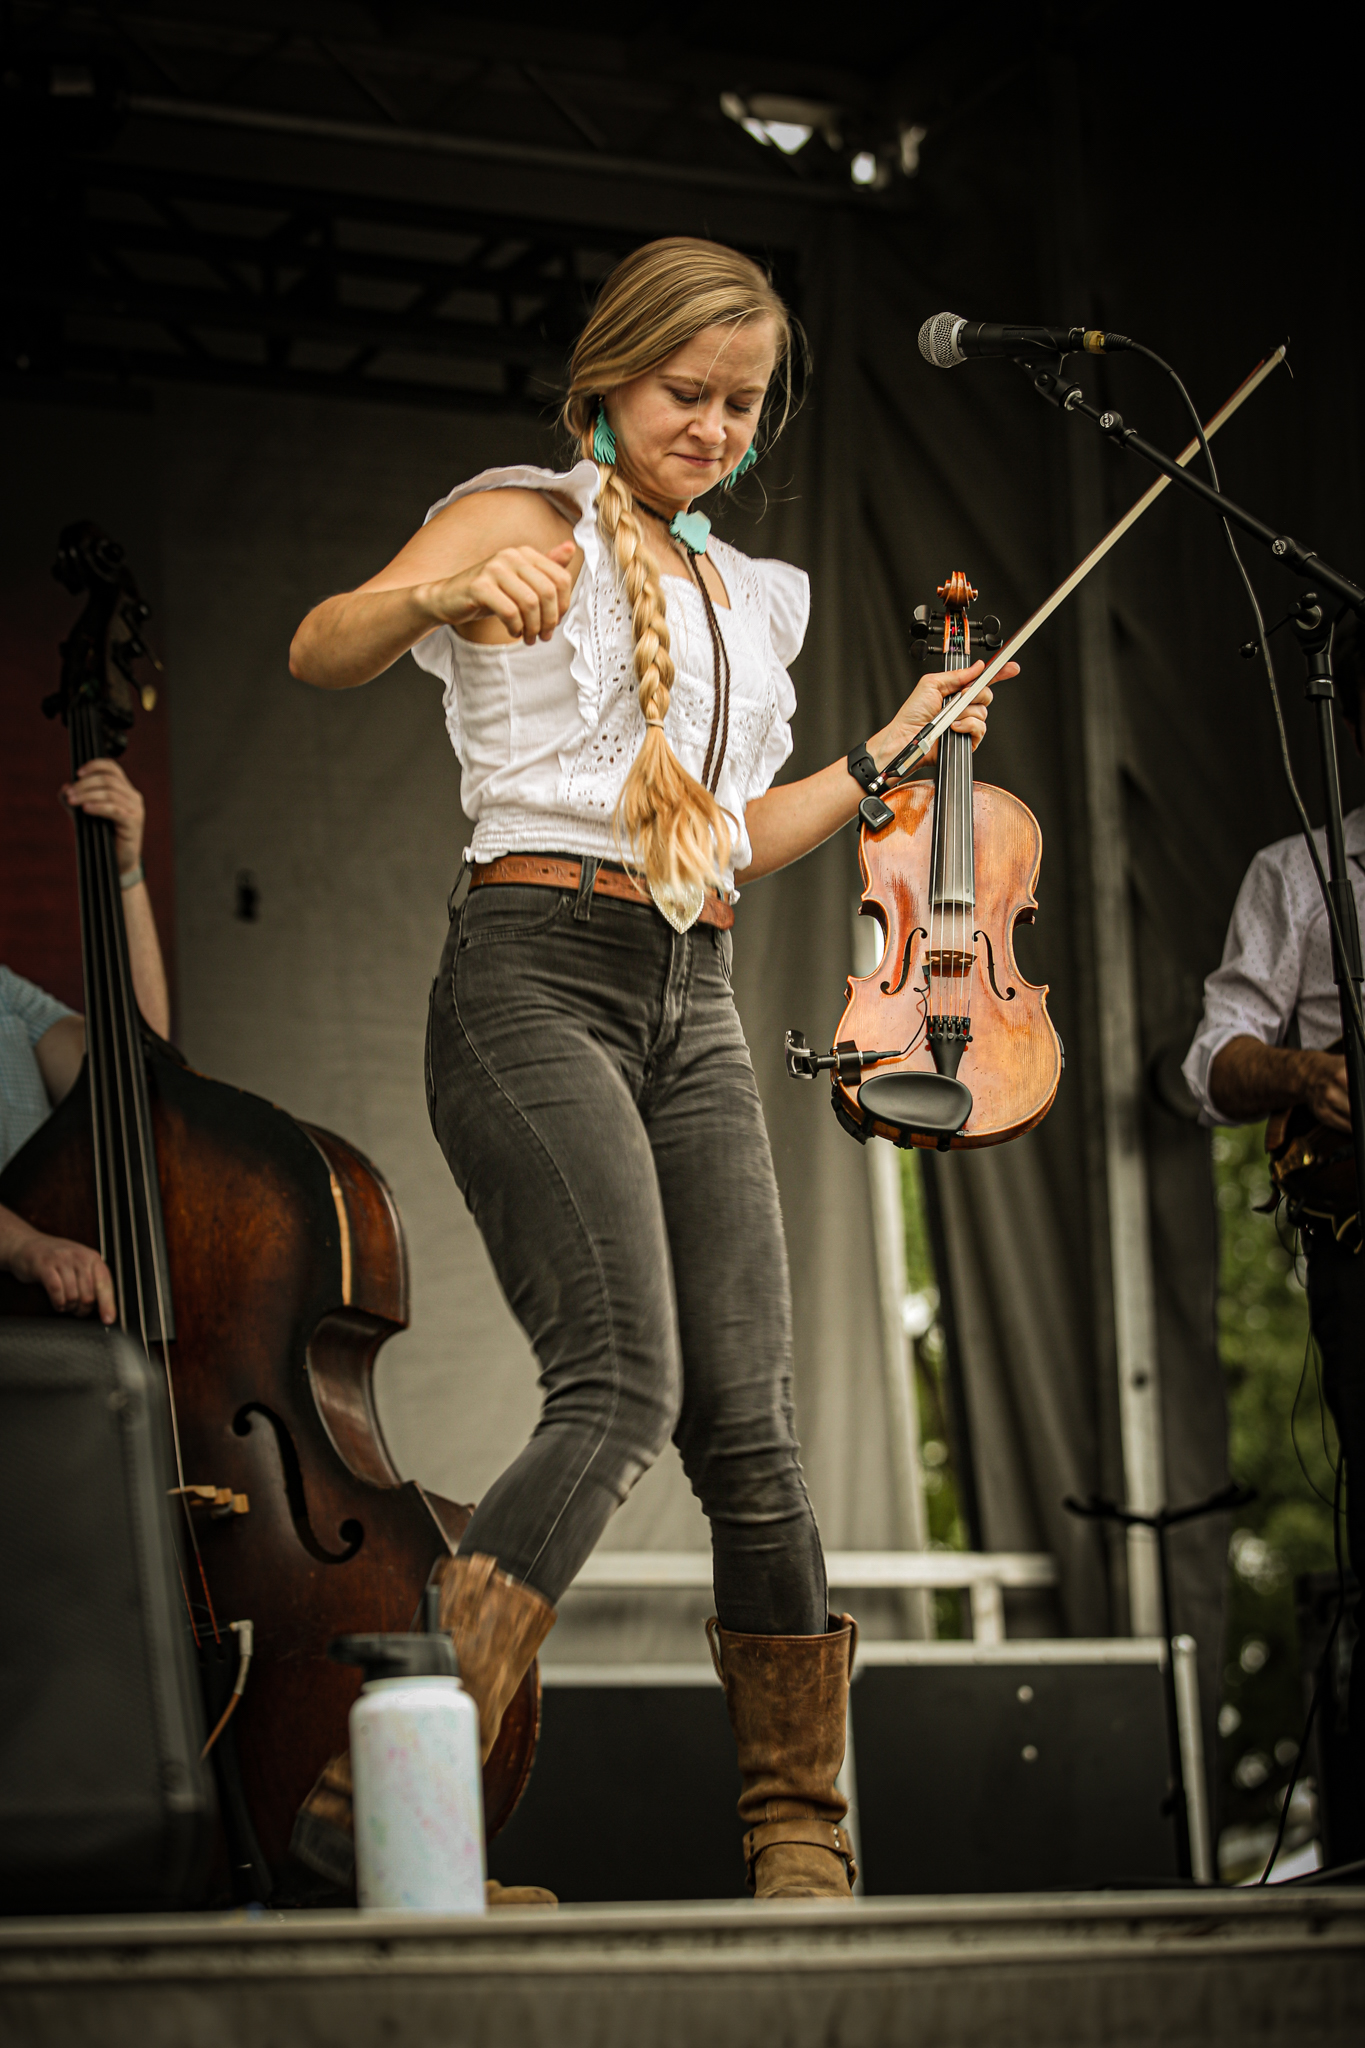 Hillary Klug known as the dancing Fiddler is photographed in Downtown Raleigh NC. 